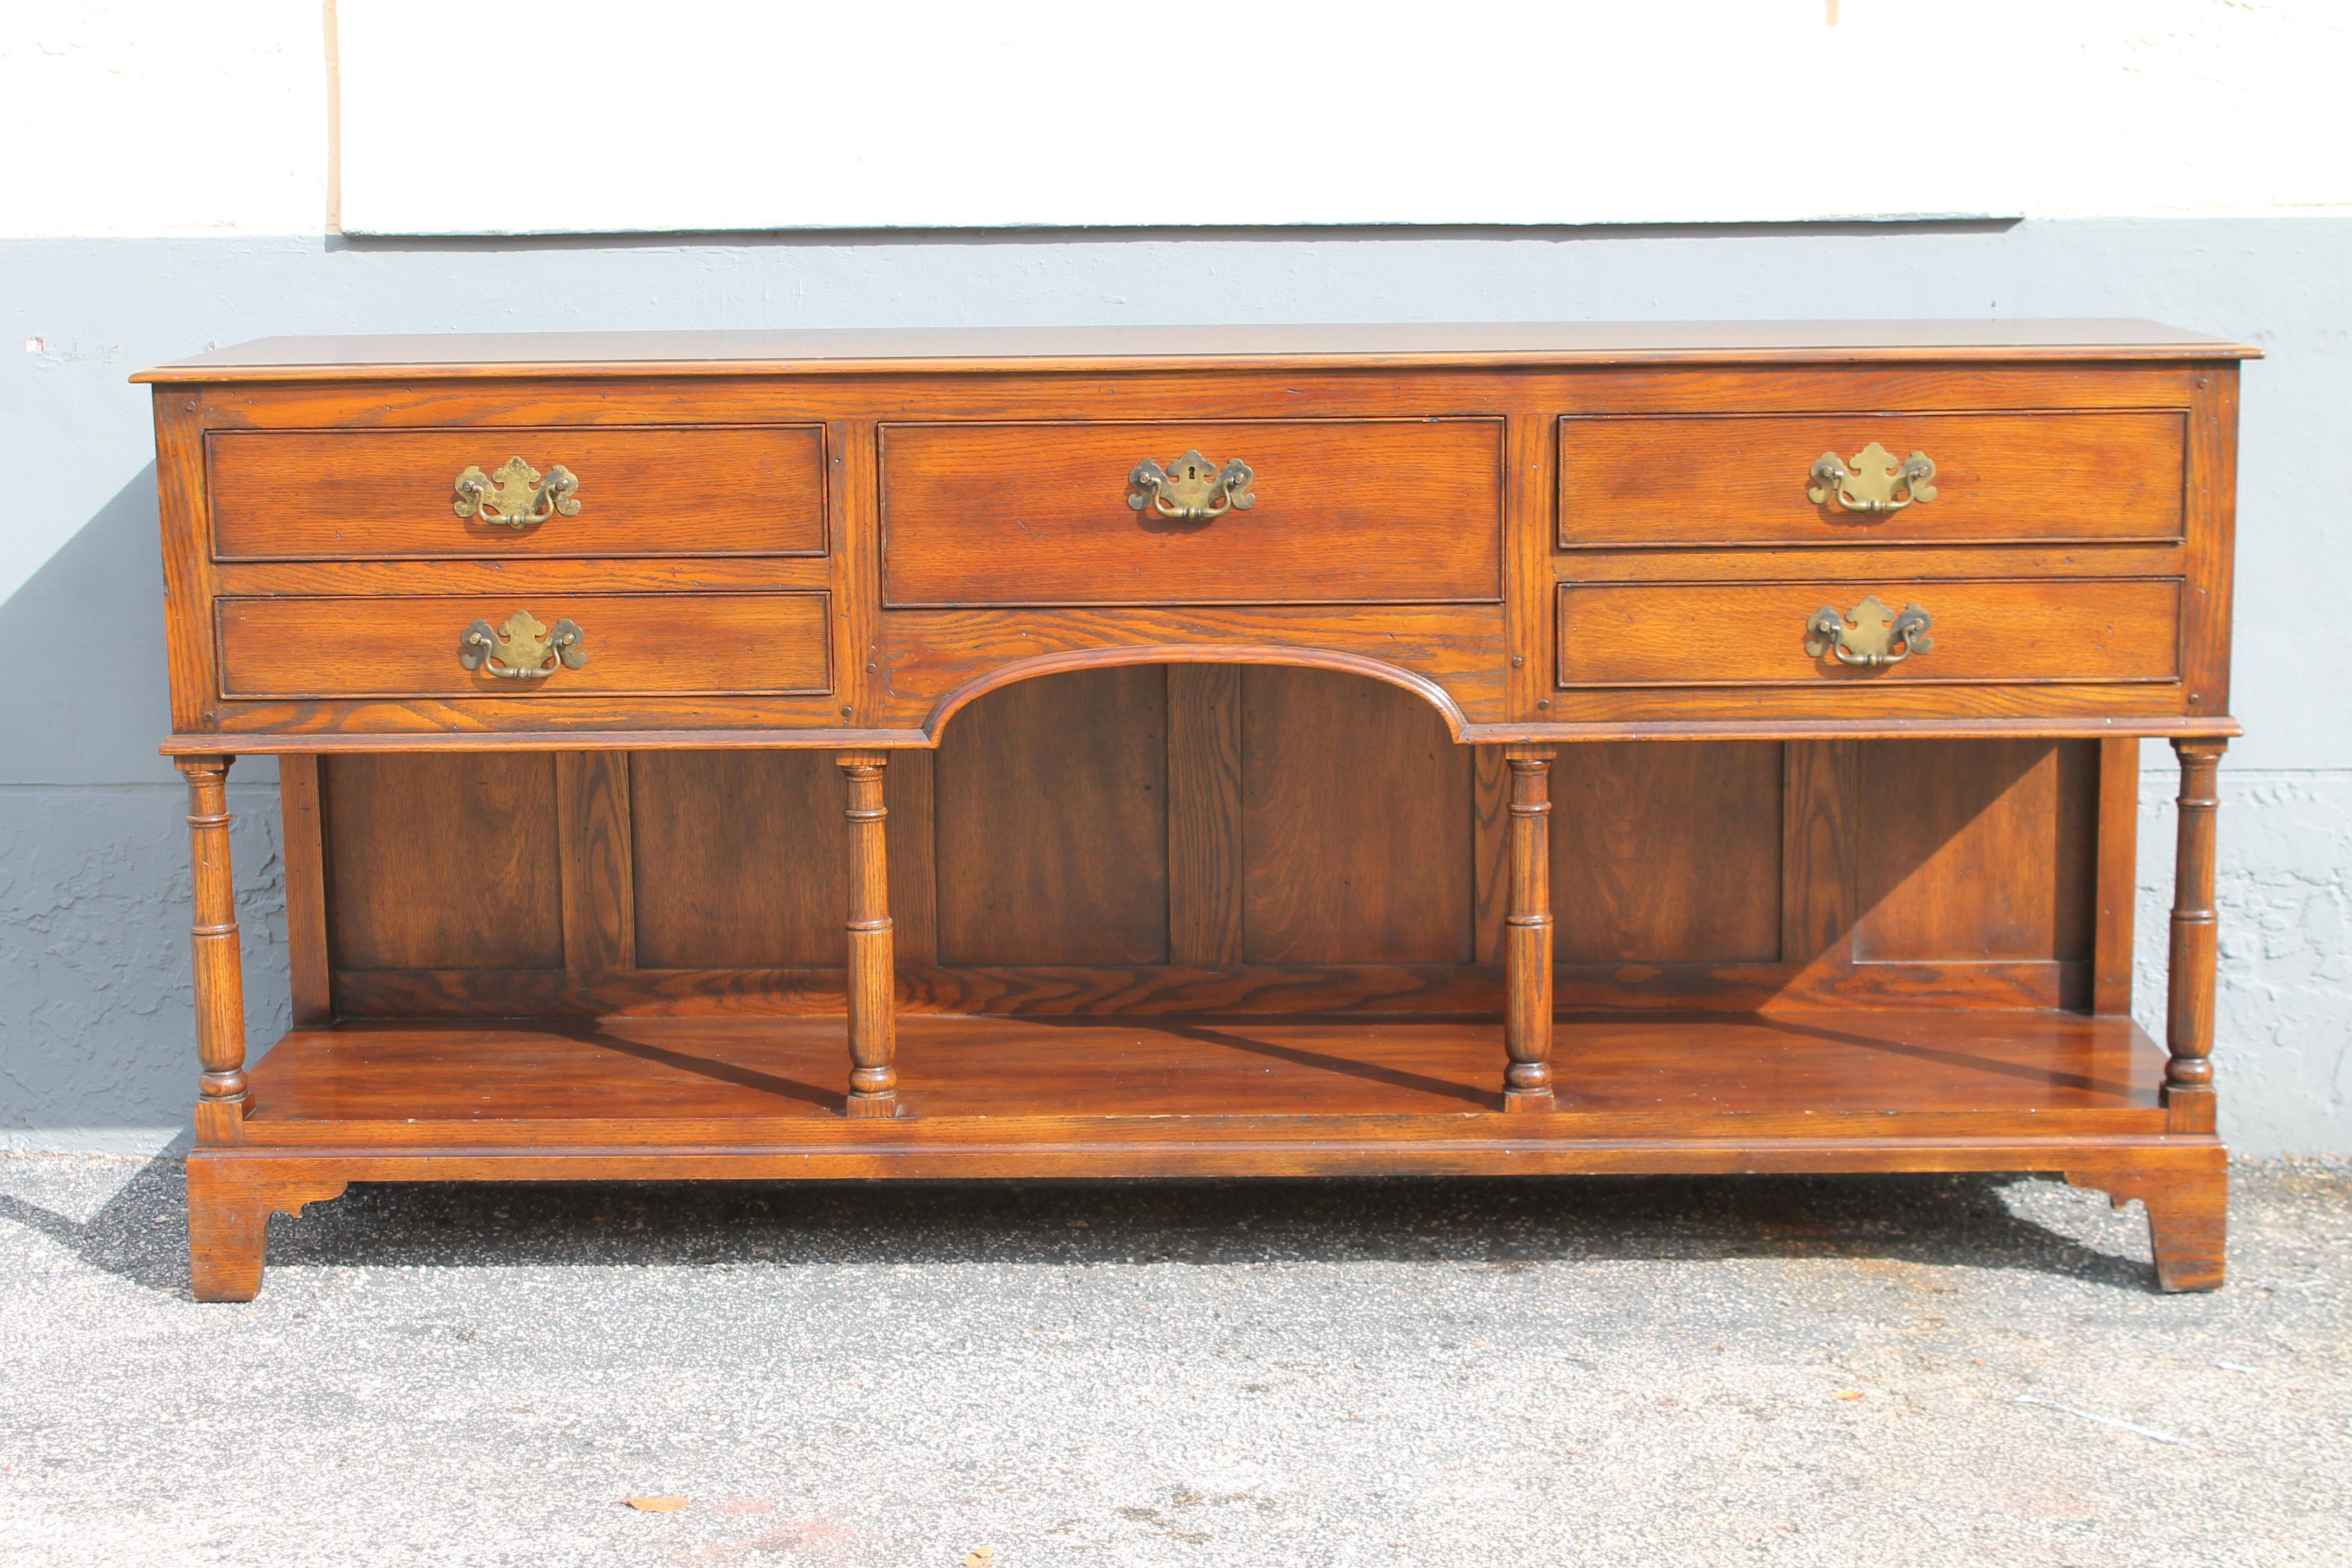 Beautiful Vintage 1970's Buffet/ Sideboard/ Credenza Signed by John Widdicomb. This buffet commands presence. There is much closed and open storage. Miami Beach Estate Purchase.